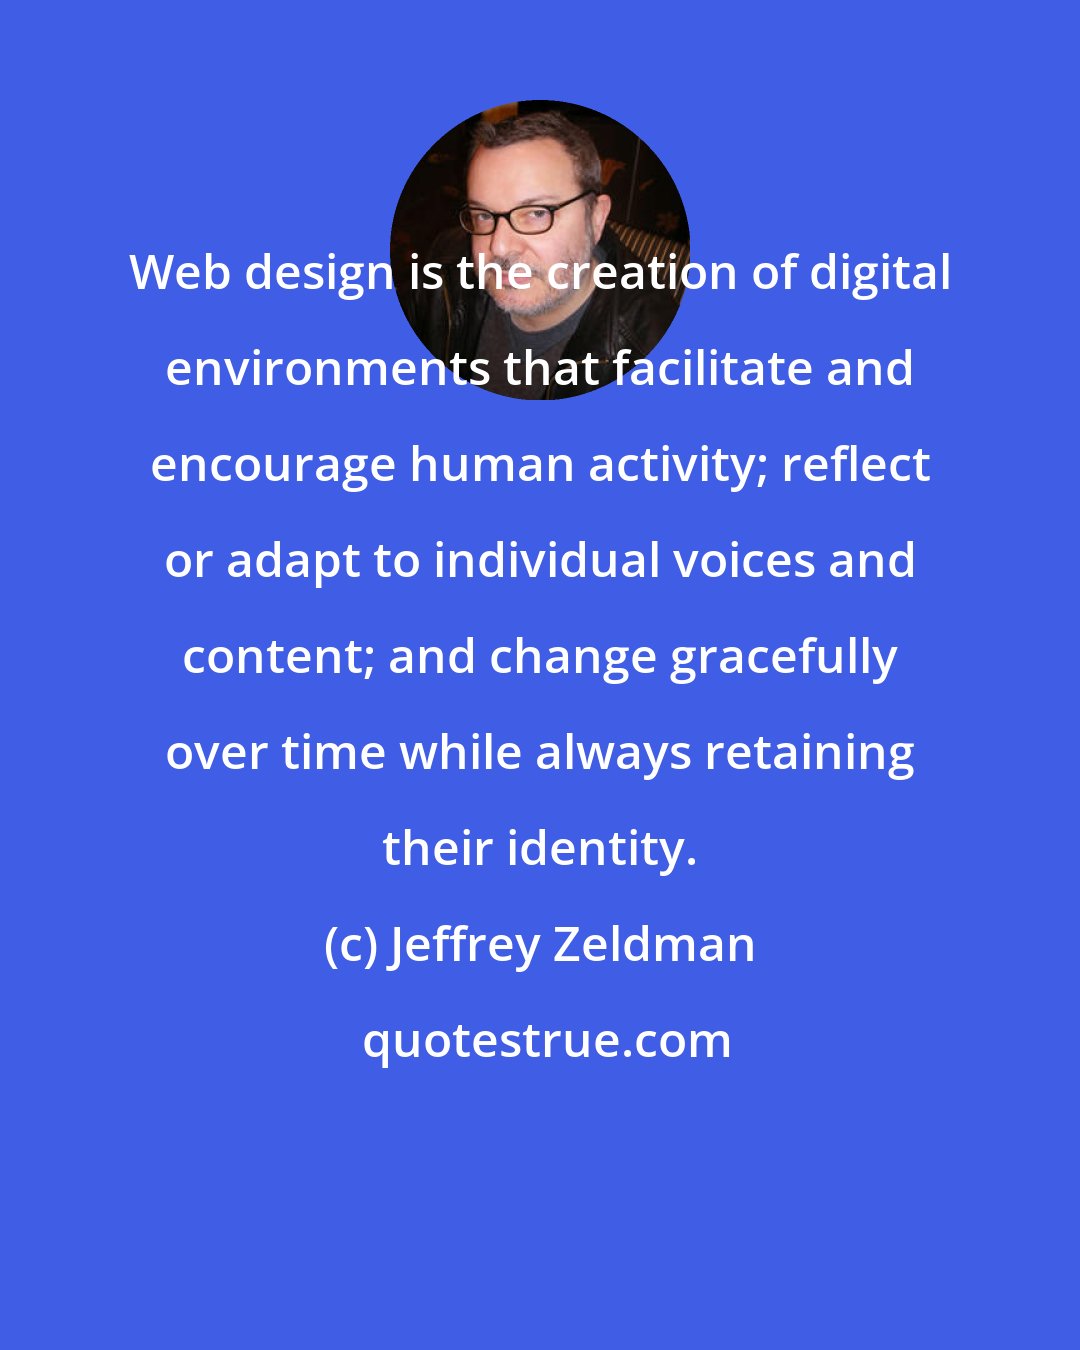 Jeffrey Zeldman: Web design is the creation of digital environments that facilitate and encourage human activity; reflect or adapt to individual voices and content; and change gracefully over time while always retaining their identity.